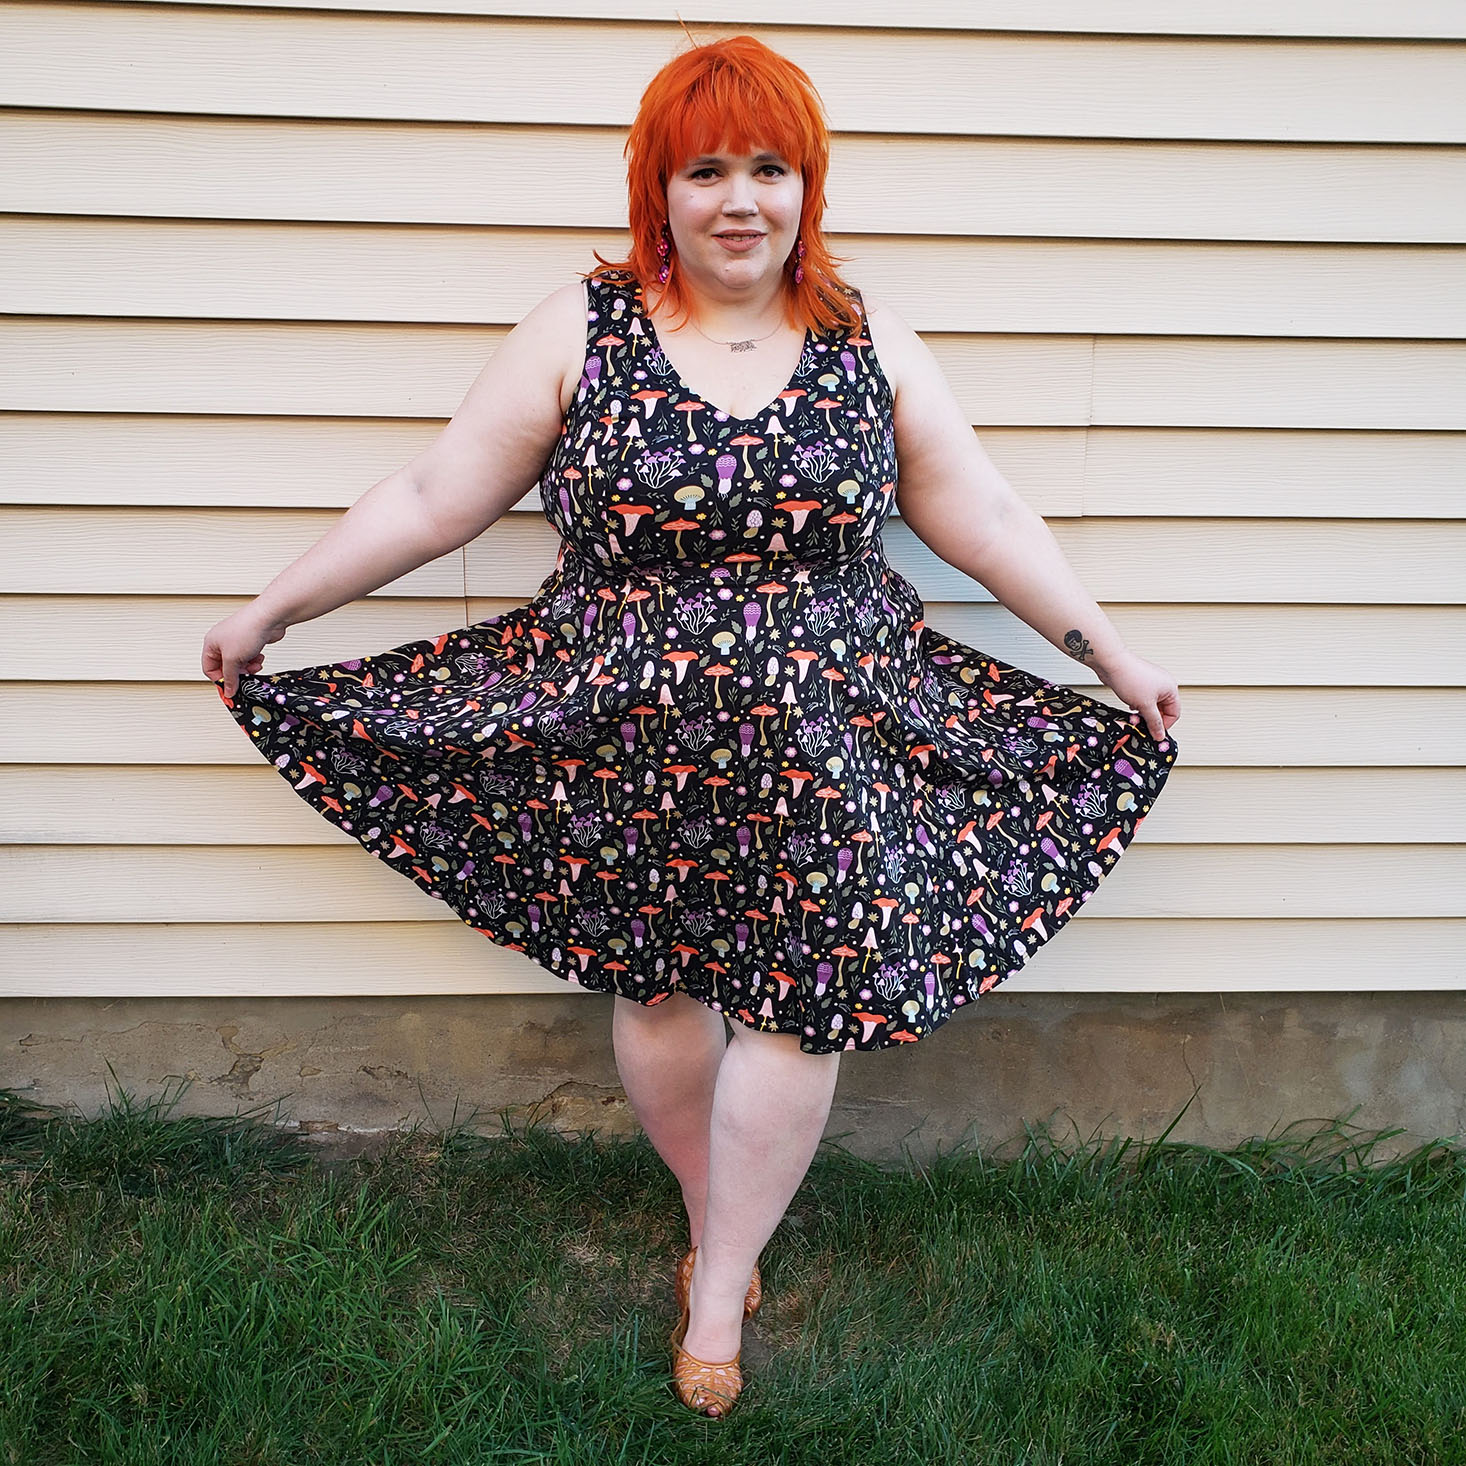 Gwynnie Bee Plus Size Clothing November 2021 Review + Coupon